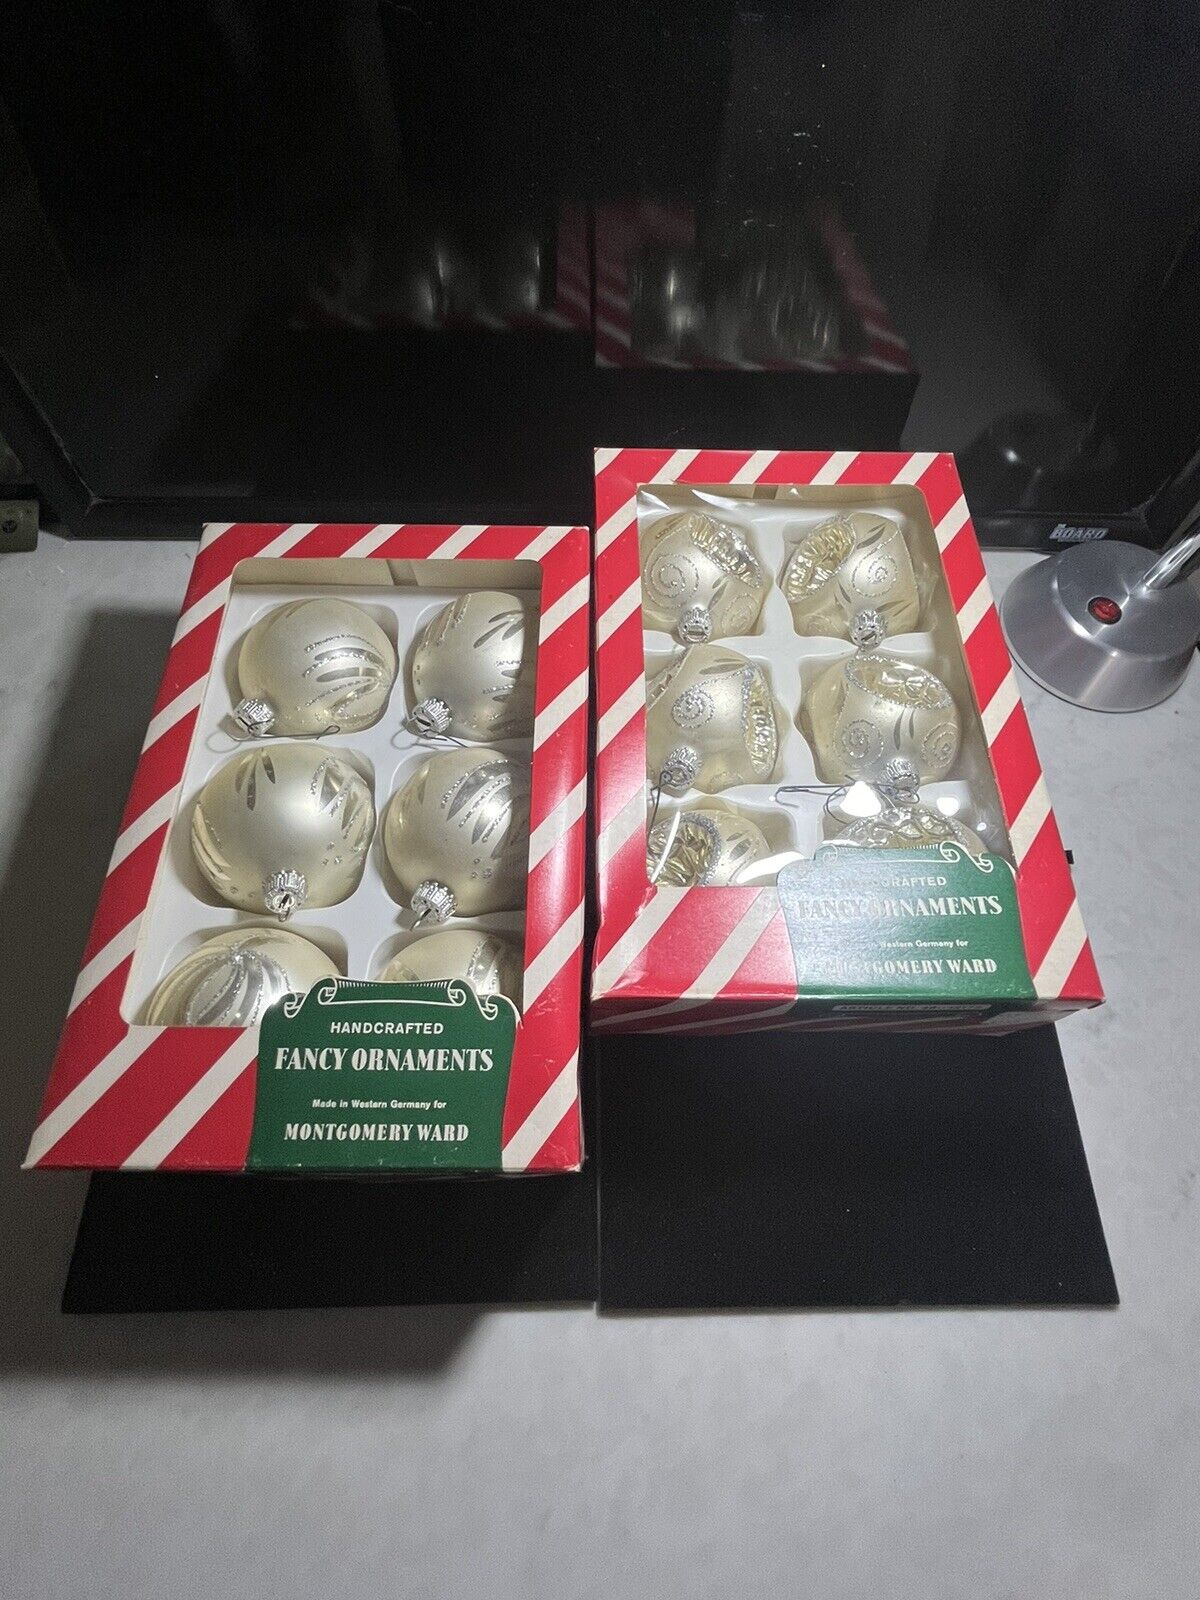 2 VINTAGE WEST GERMANY GLASS ORNAMENTS HANDCRAFTED MONTGOMERY WARDS W/BOX